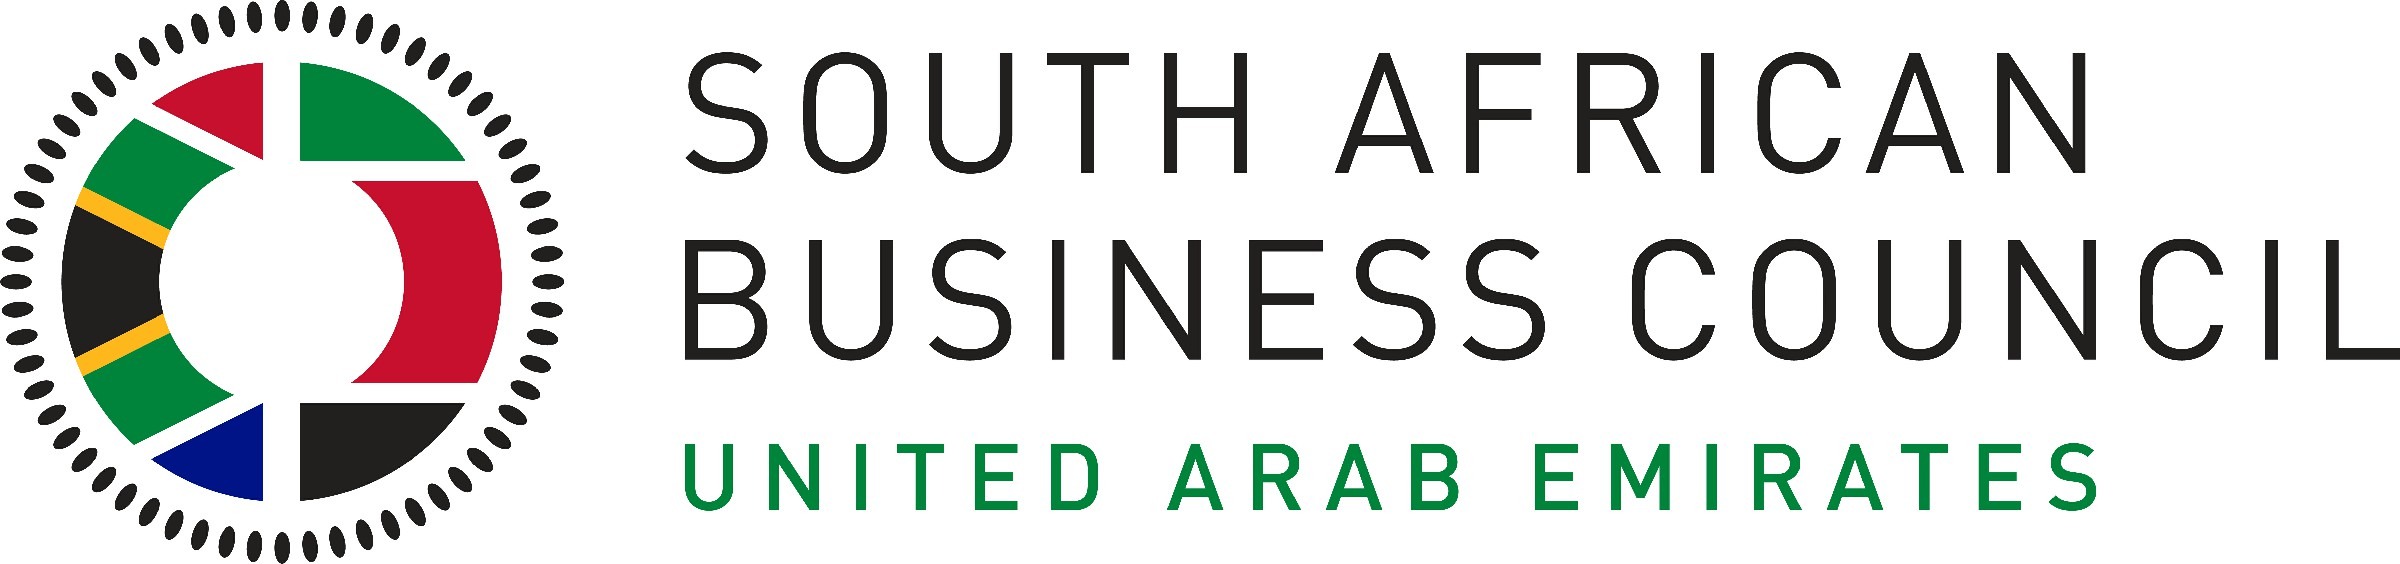 South African Business Council UAE